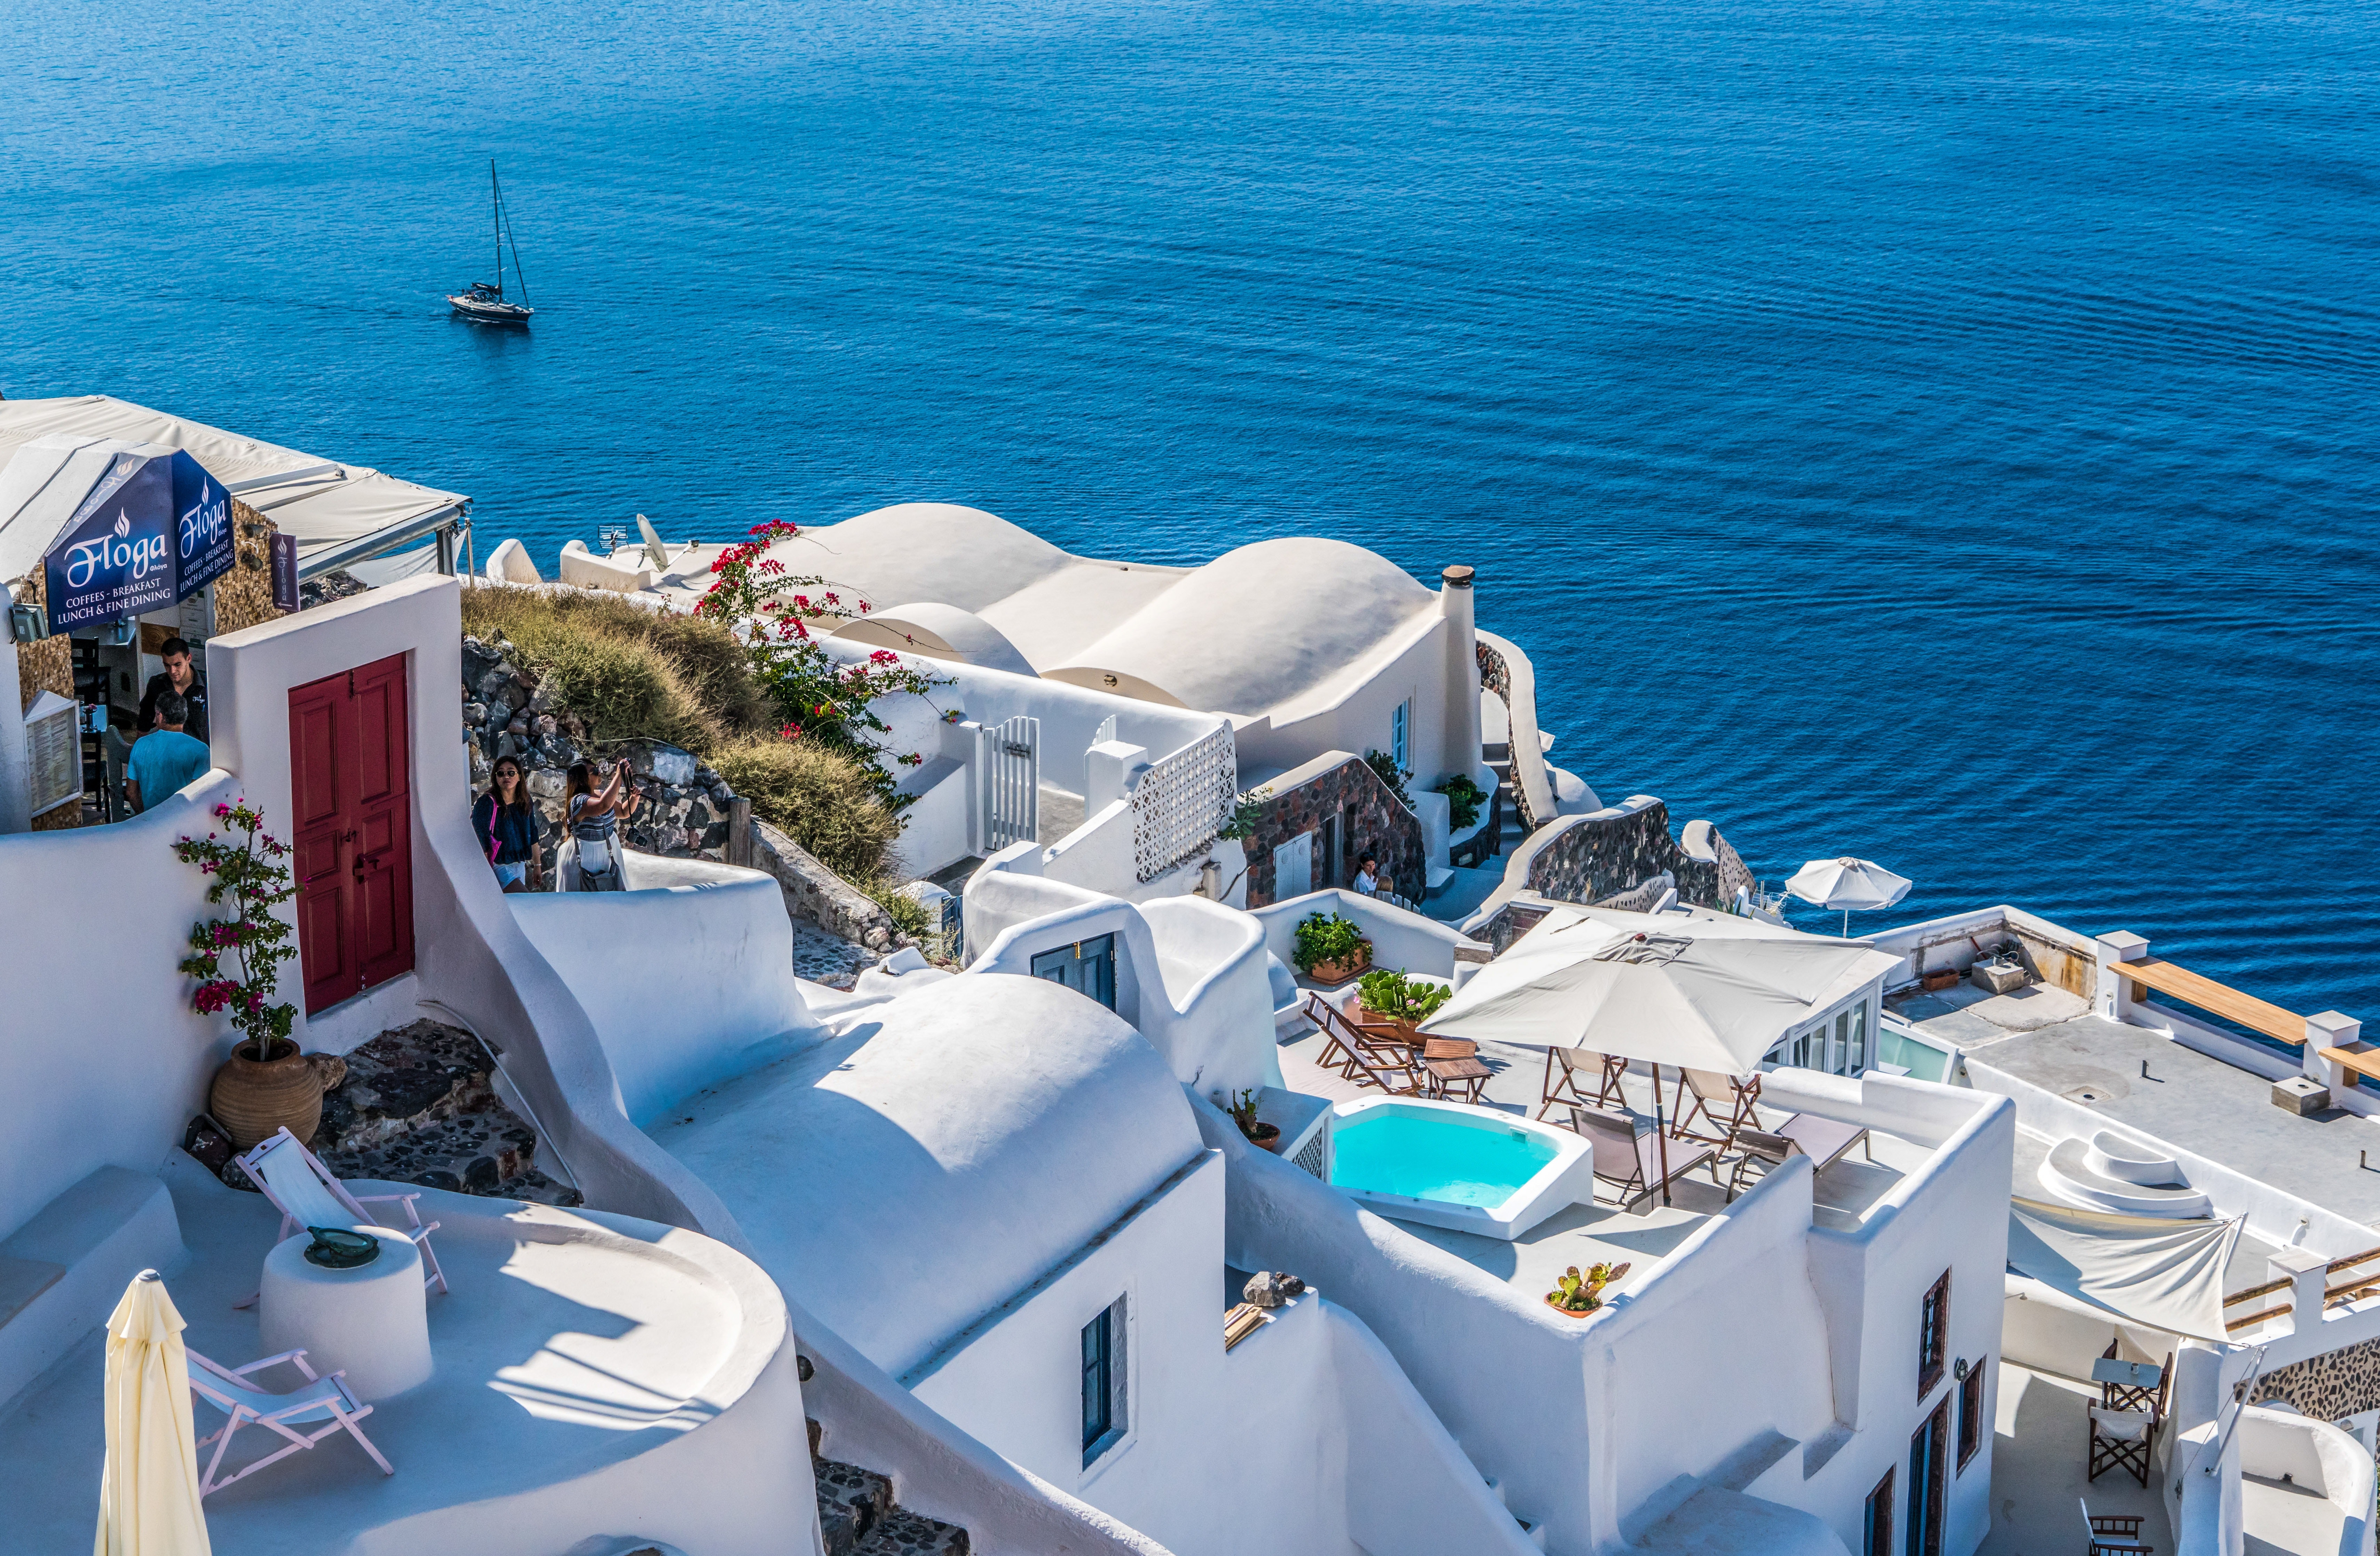 Visit Santorini best offers for an unforgettable Summer experience 
Greece from 199€